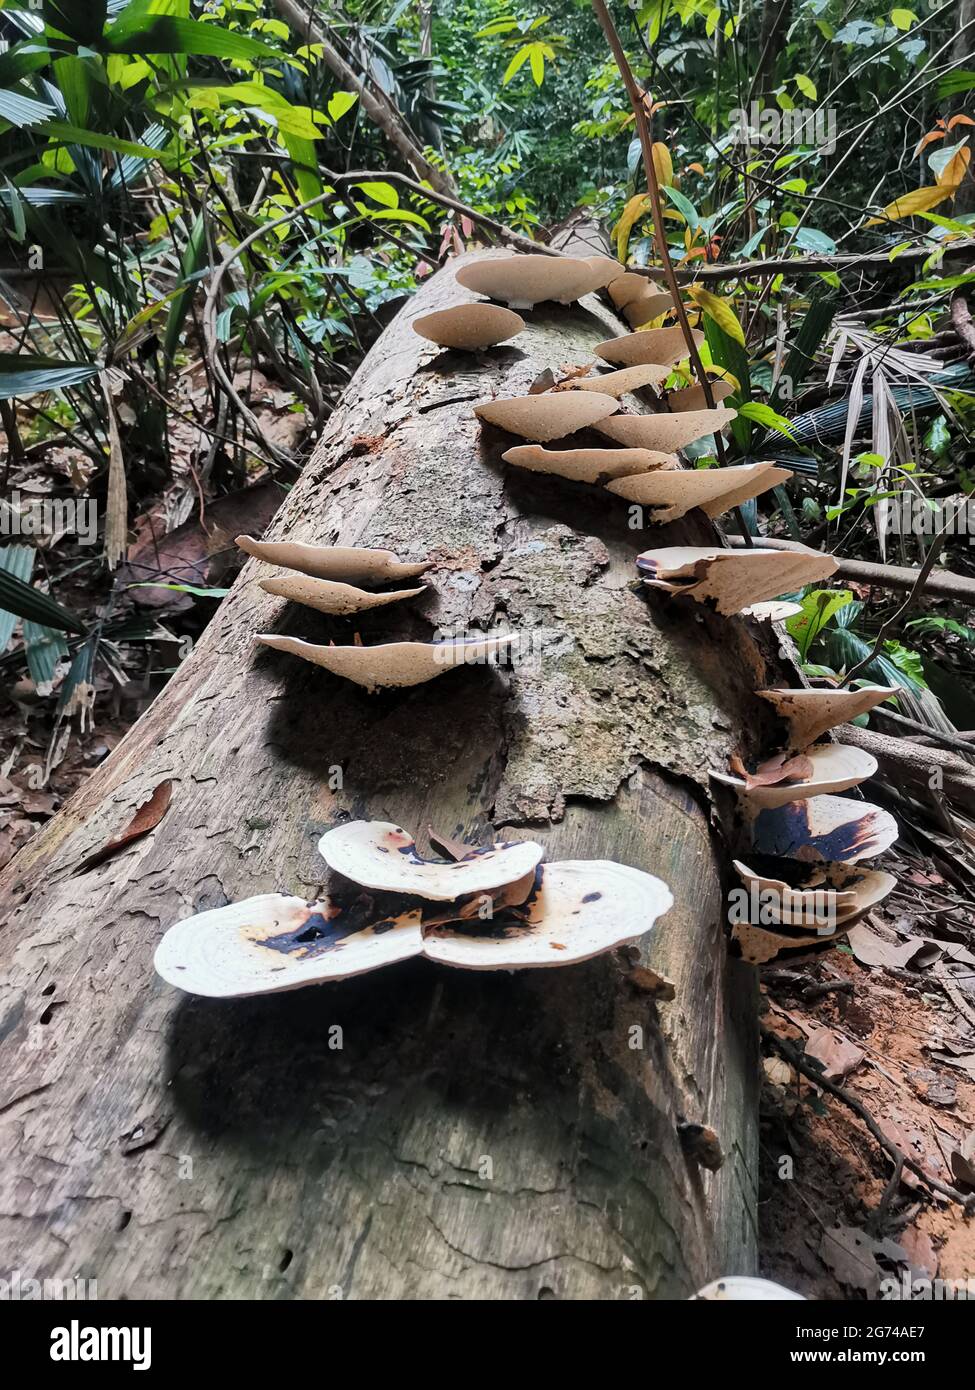 Mushrooms on a dead fallen tree trunk in the rainforest. Fungi mushroom species grows on recently cut or fallen logs. Milled lumber, rotted wood in tr Stock Photo